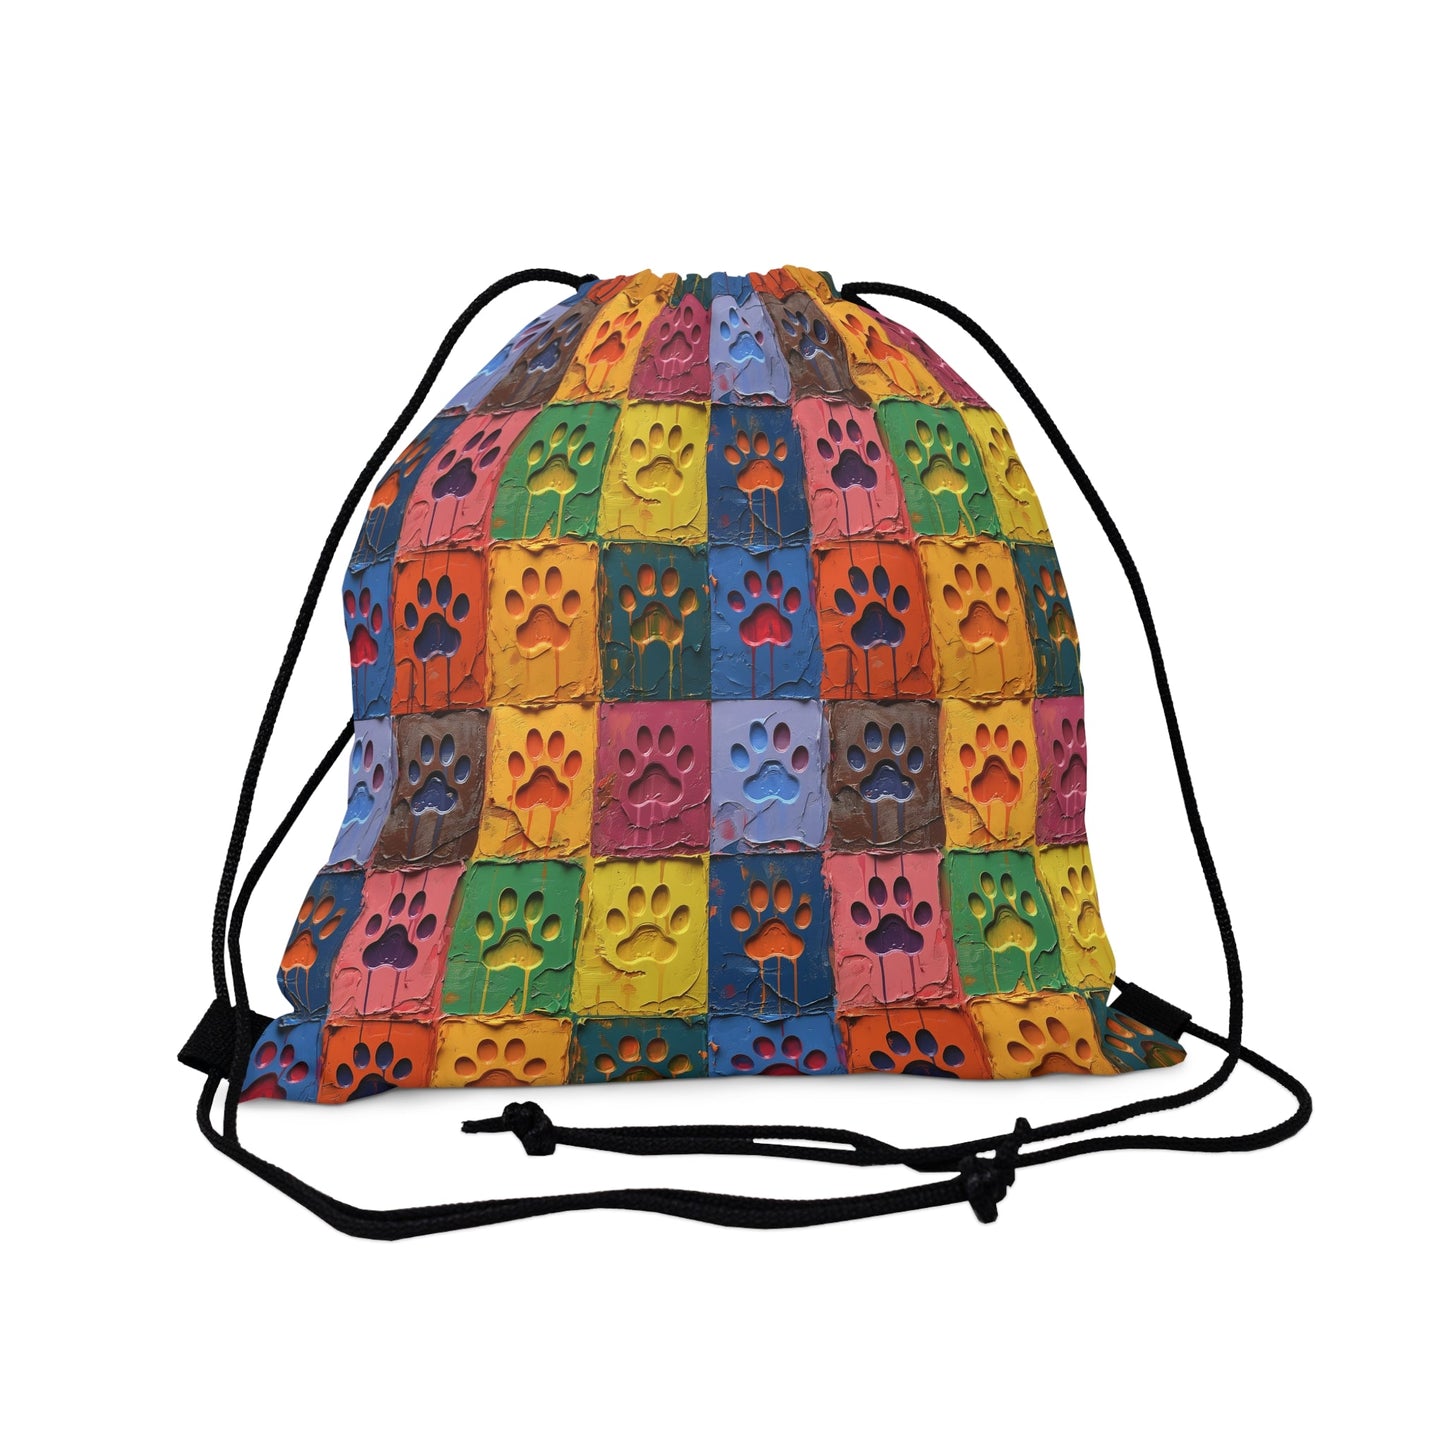 Outdoor Drawstring Bag Featuring Large Painted Paw Prints - Hobbster